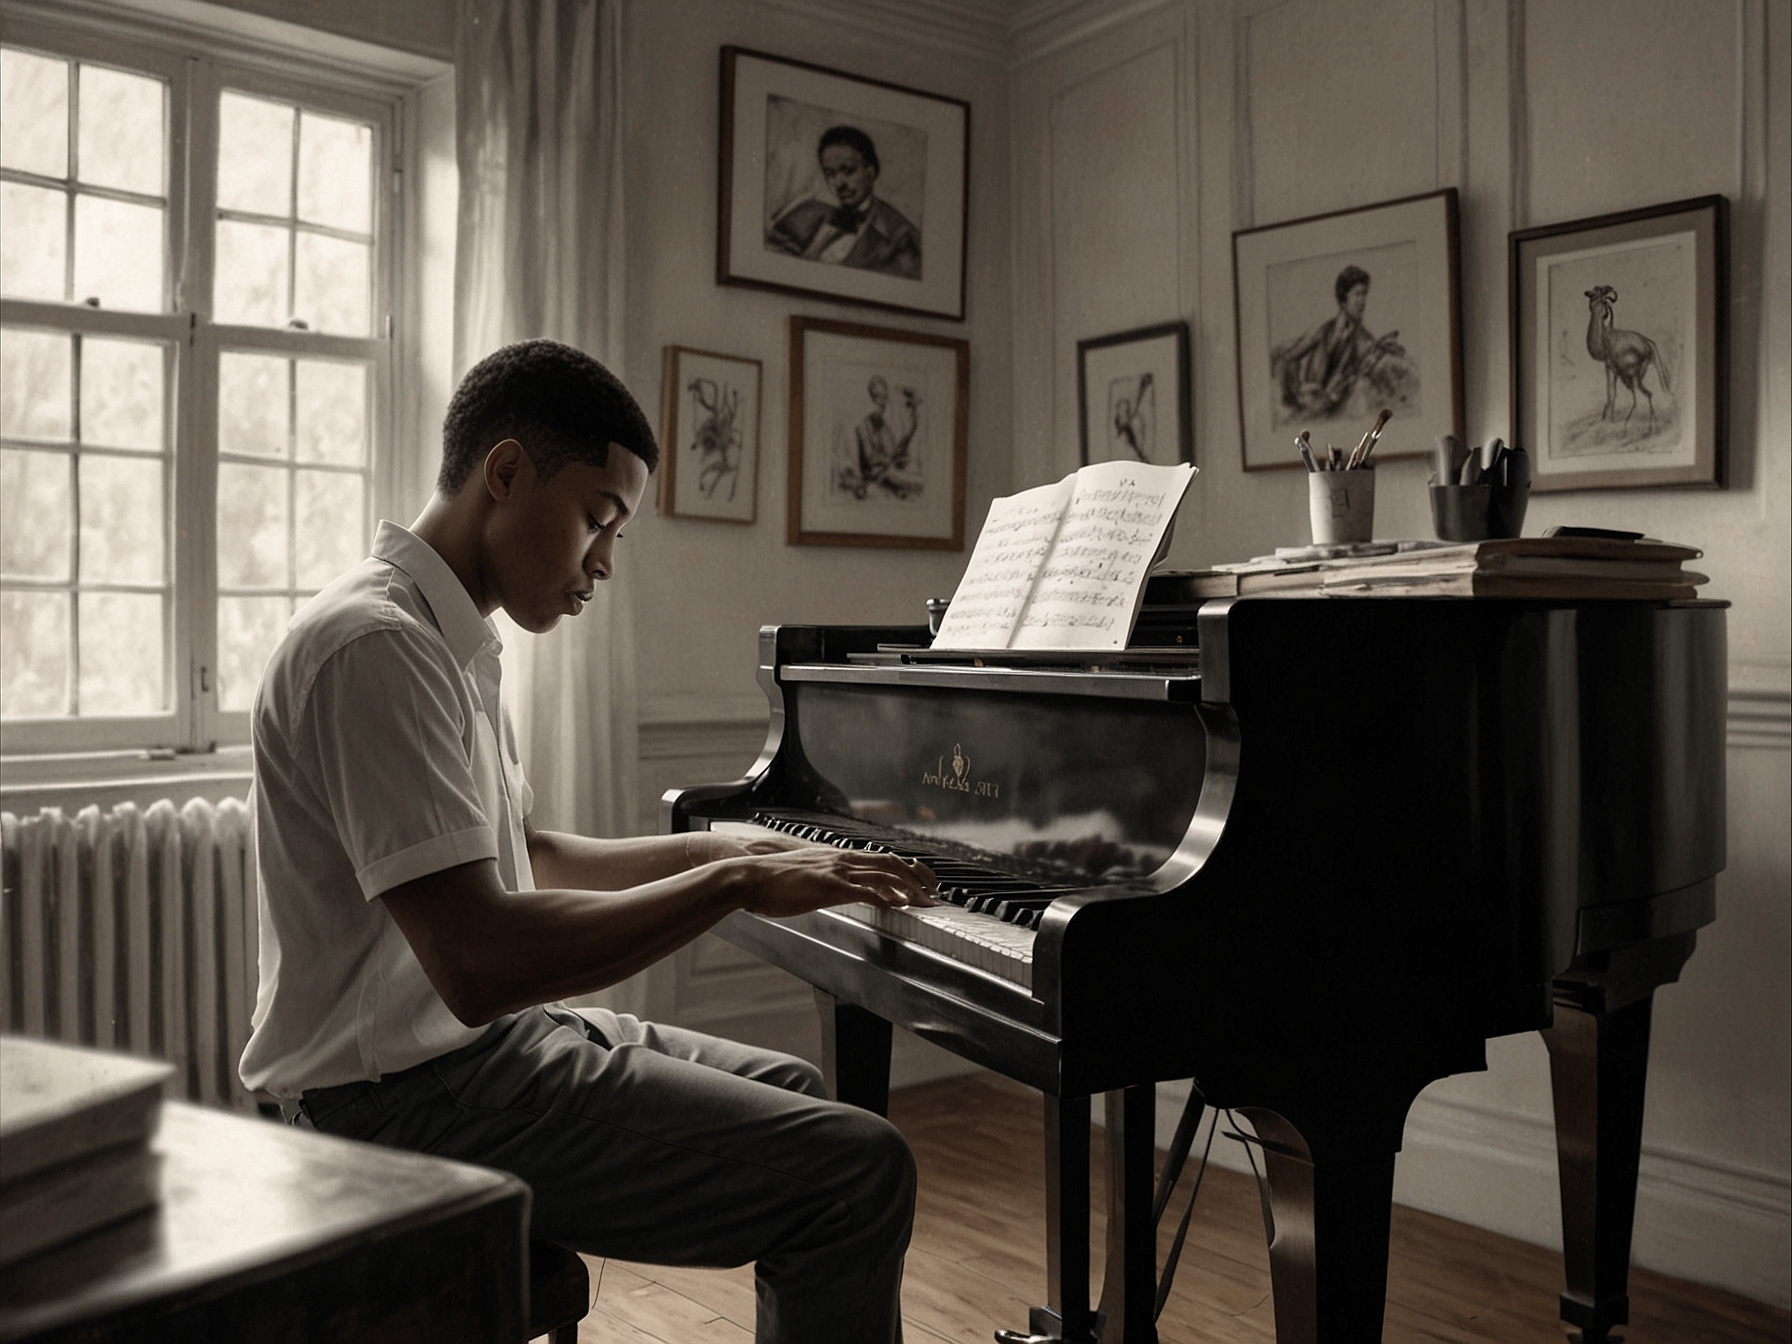 Michael Rainey Jr. plays the piano in a serene studio, showcasing his passion for music, a vital escape from his intense acting schedule. The peaceful ambiance reflects his dedication to personal growth through music.